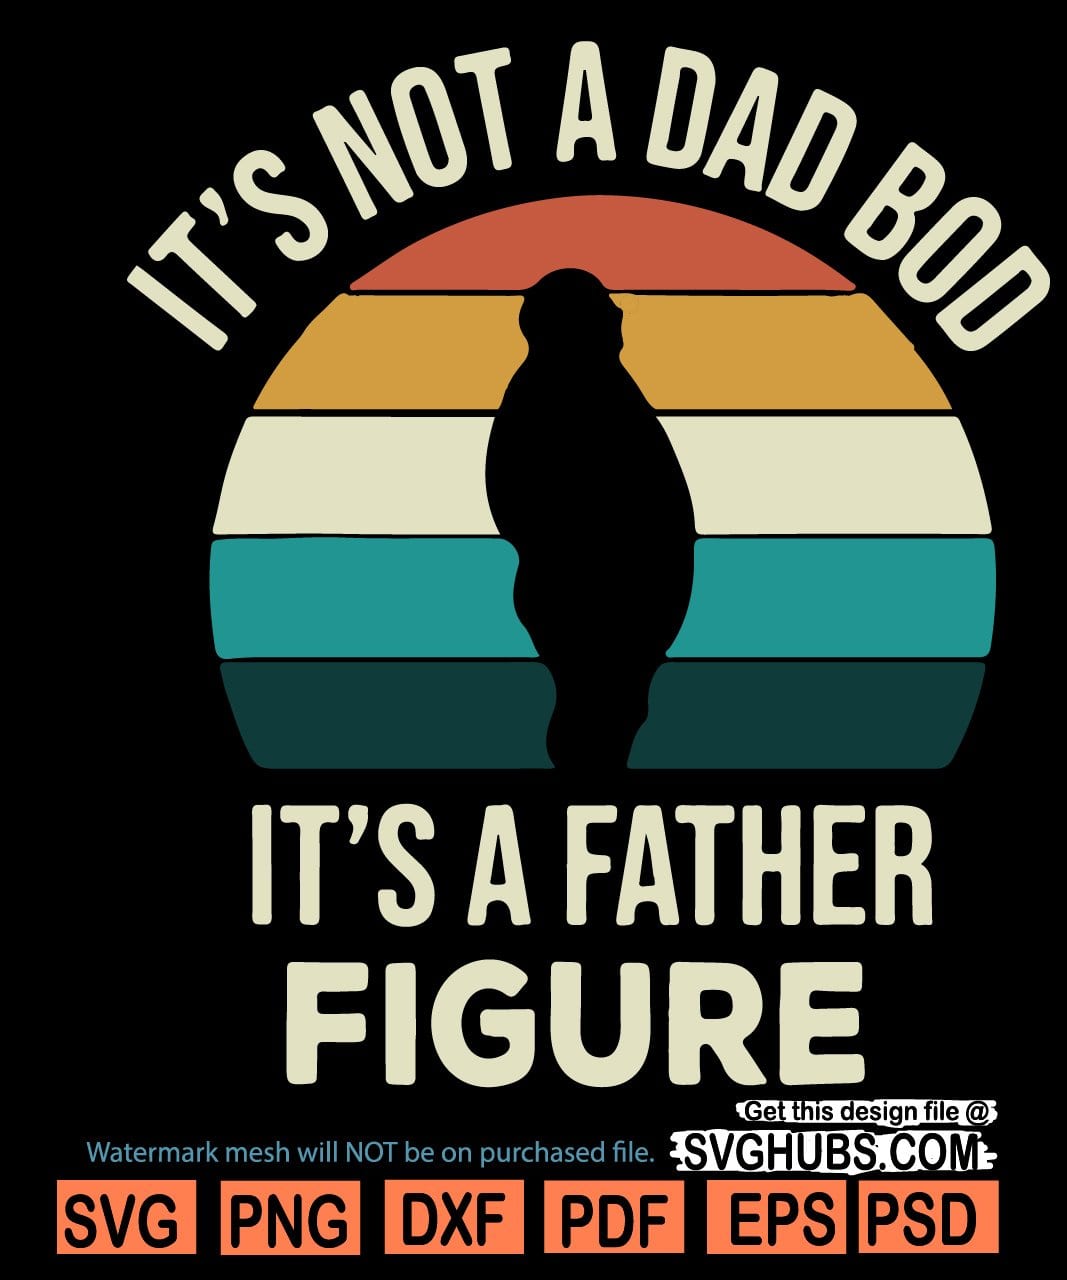 Download Its not a dad bod its a father figure SVG, Father figure svg, Fathers Day svg | Svg Hubs